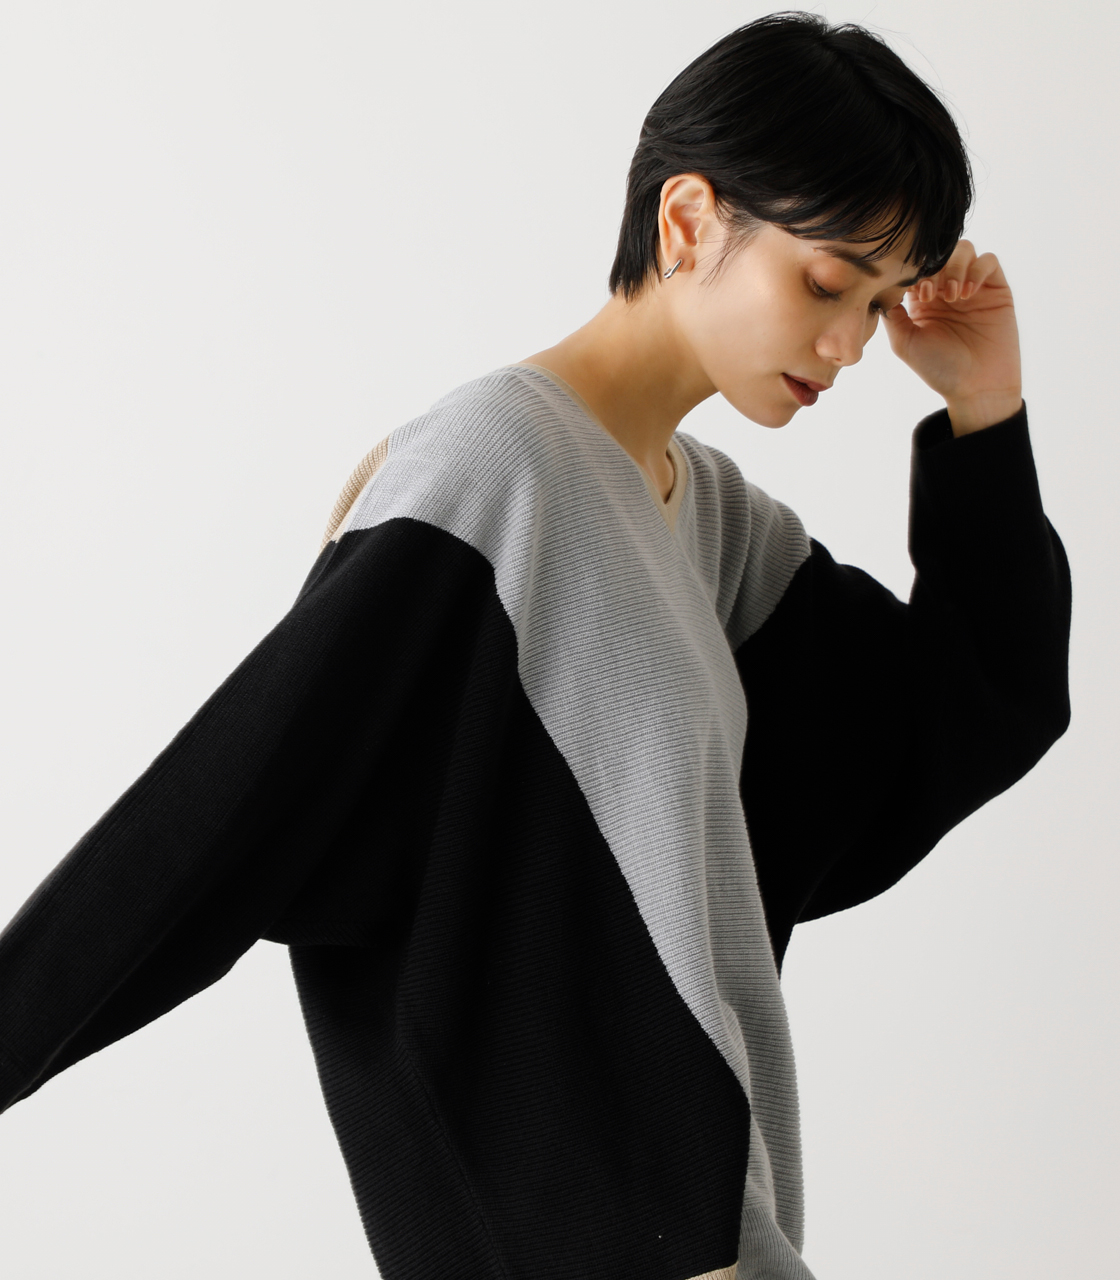 NUDIE DOLMAN KNIT TOPS/ヌーディードルマンニットトップス 詳細画像 柄GRY 3